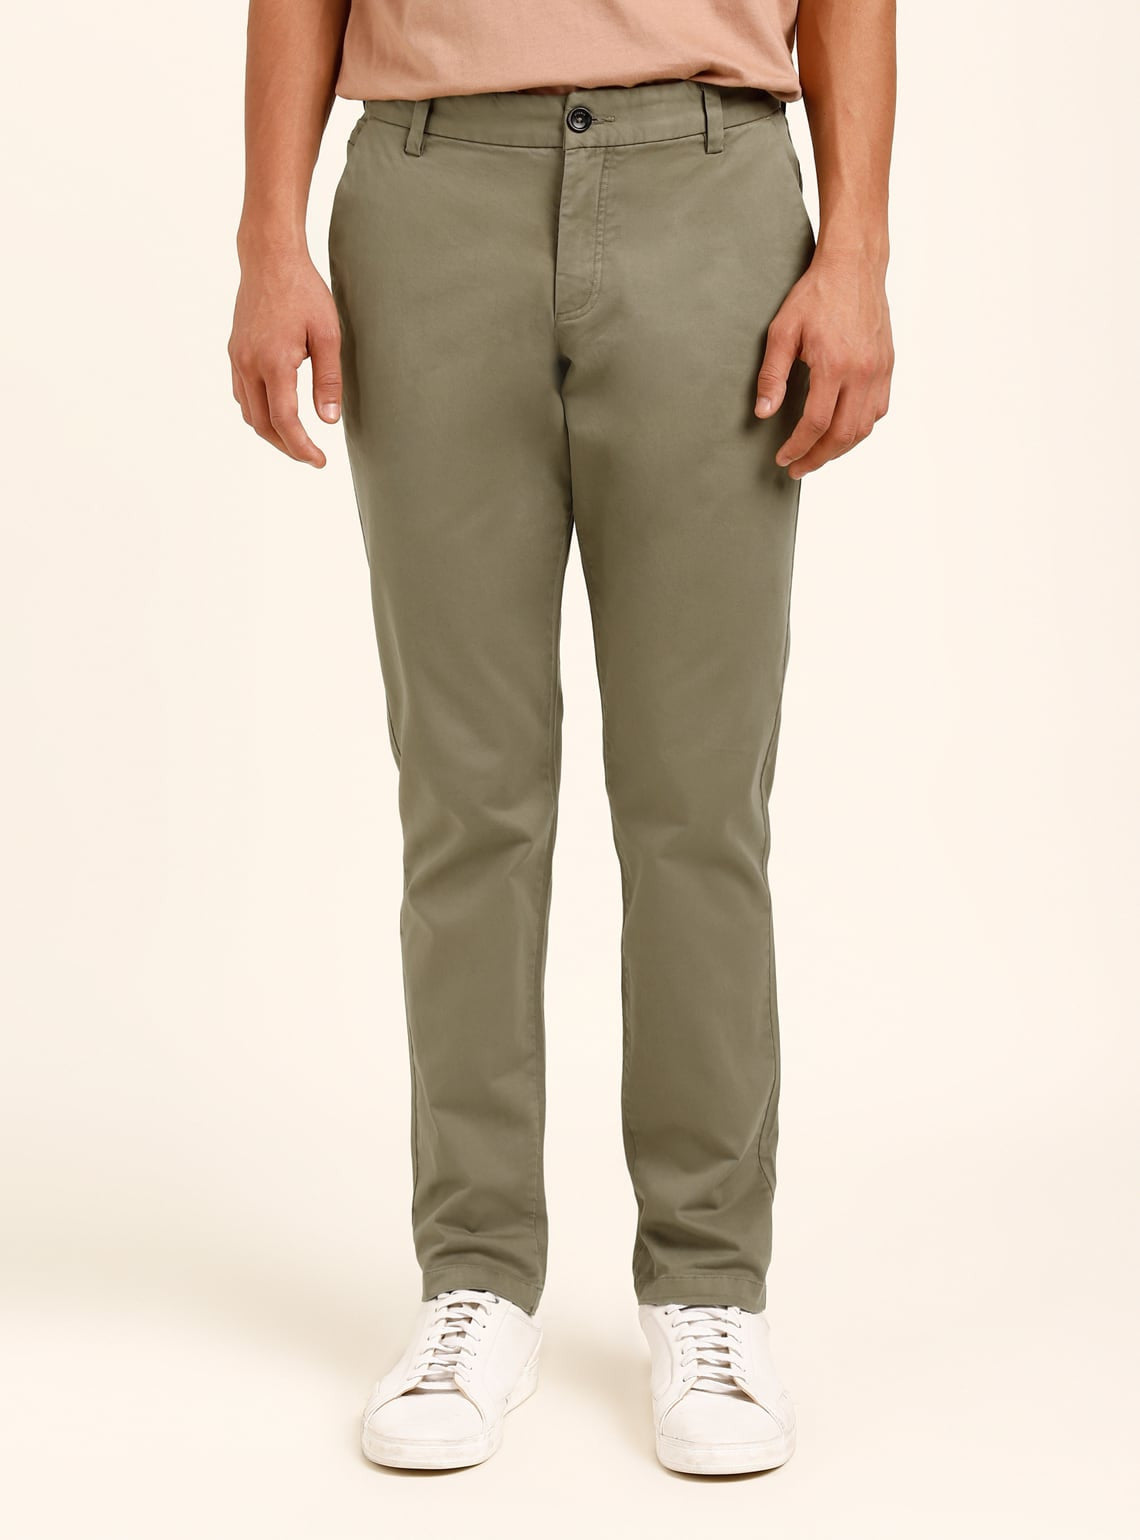 Faded Olive Chino